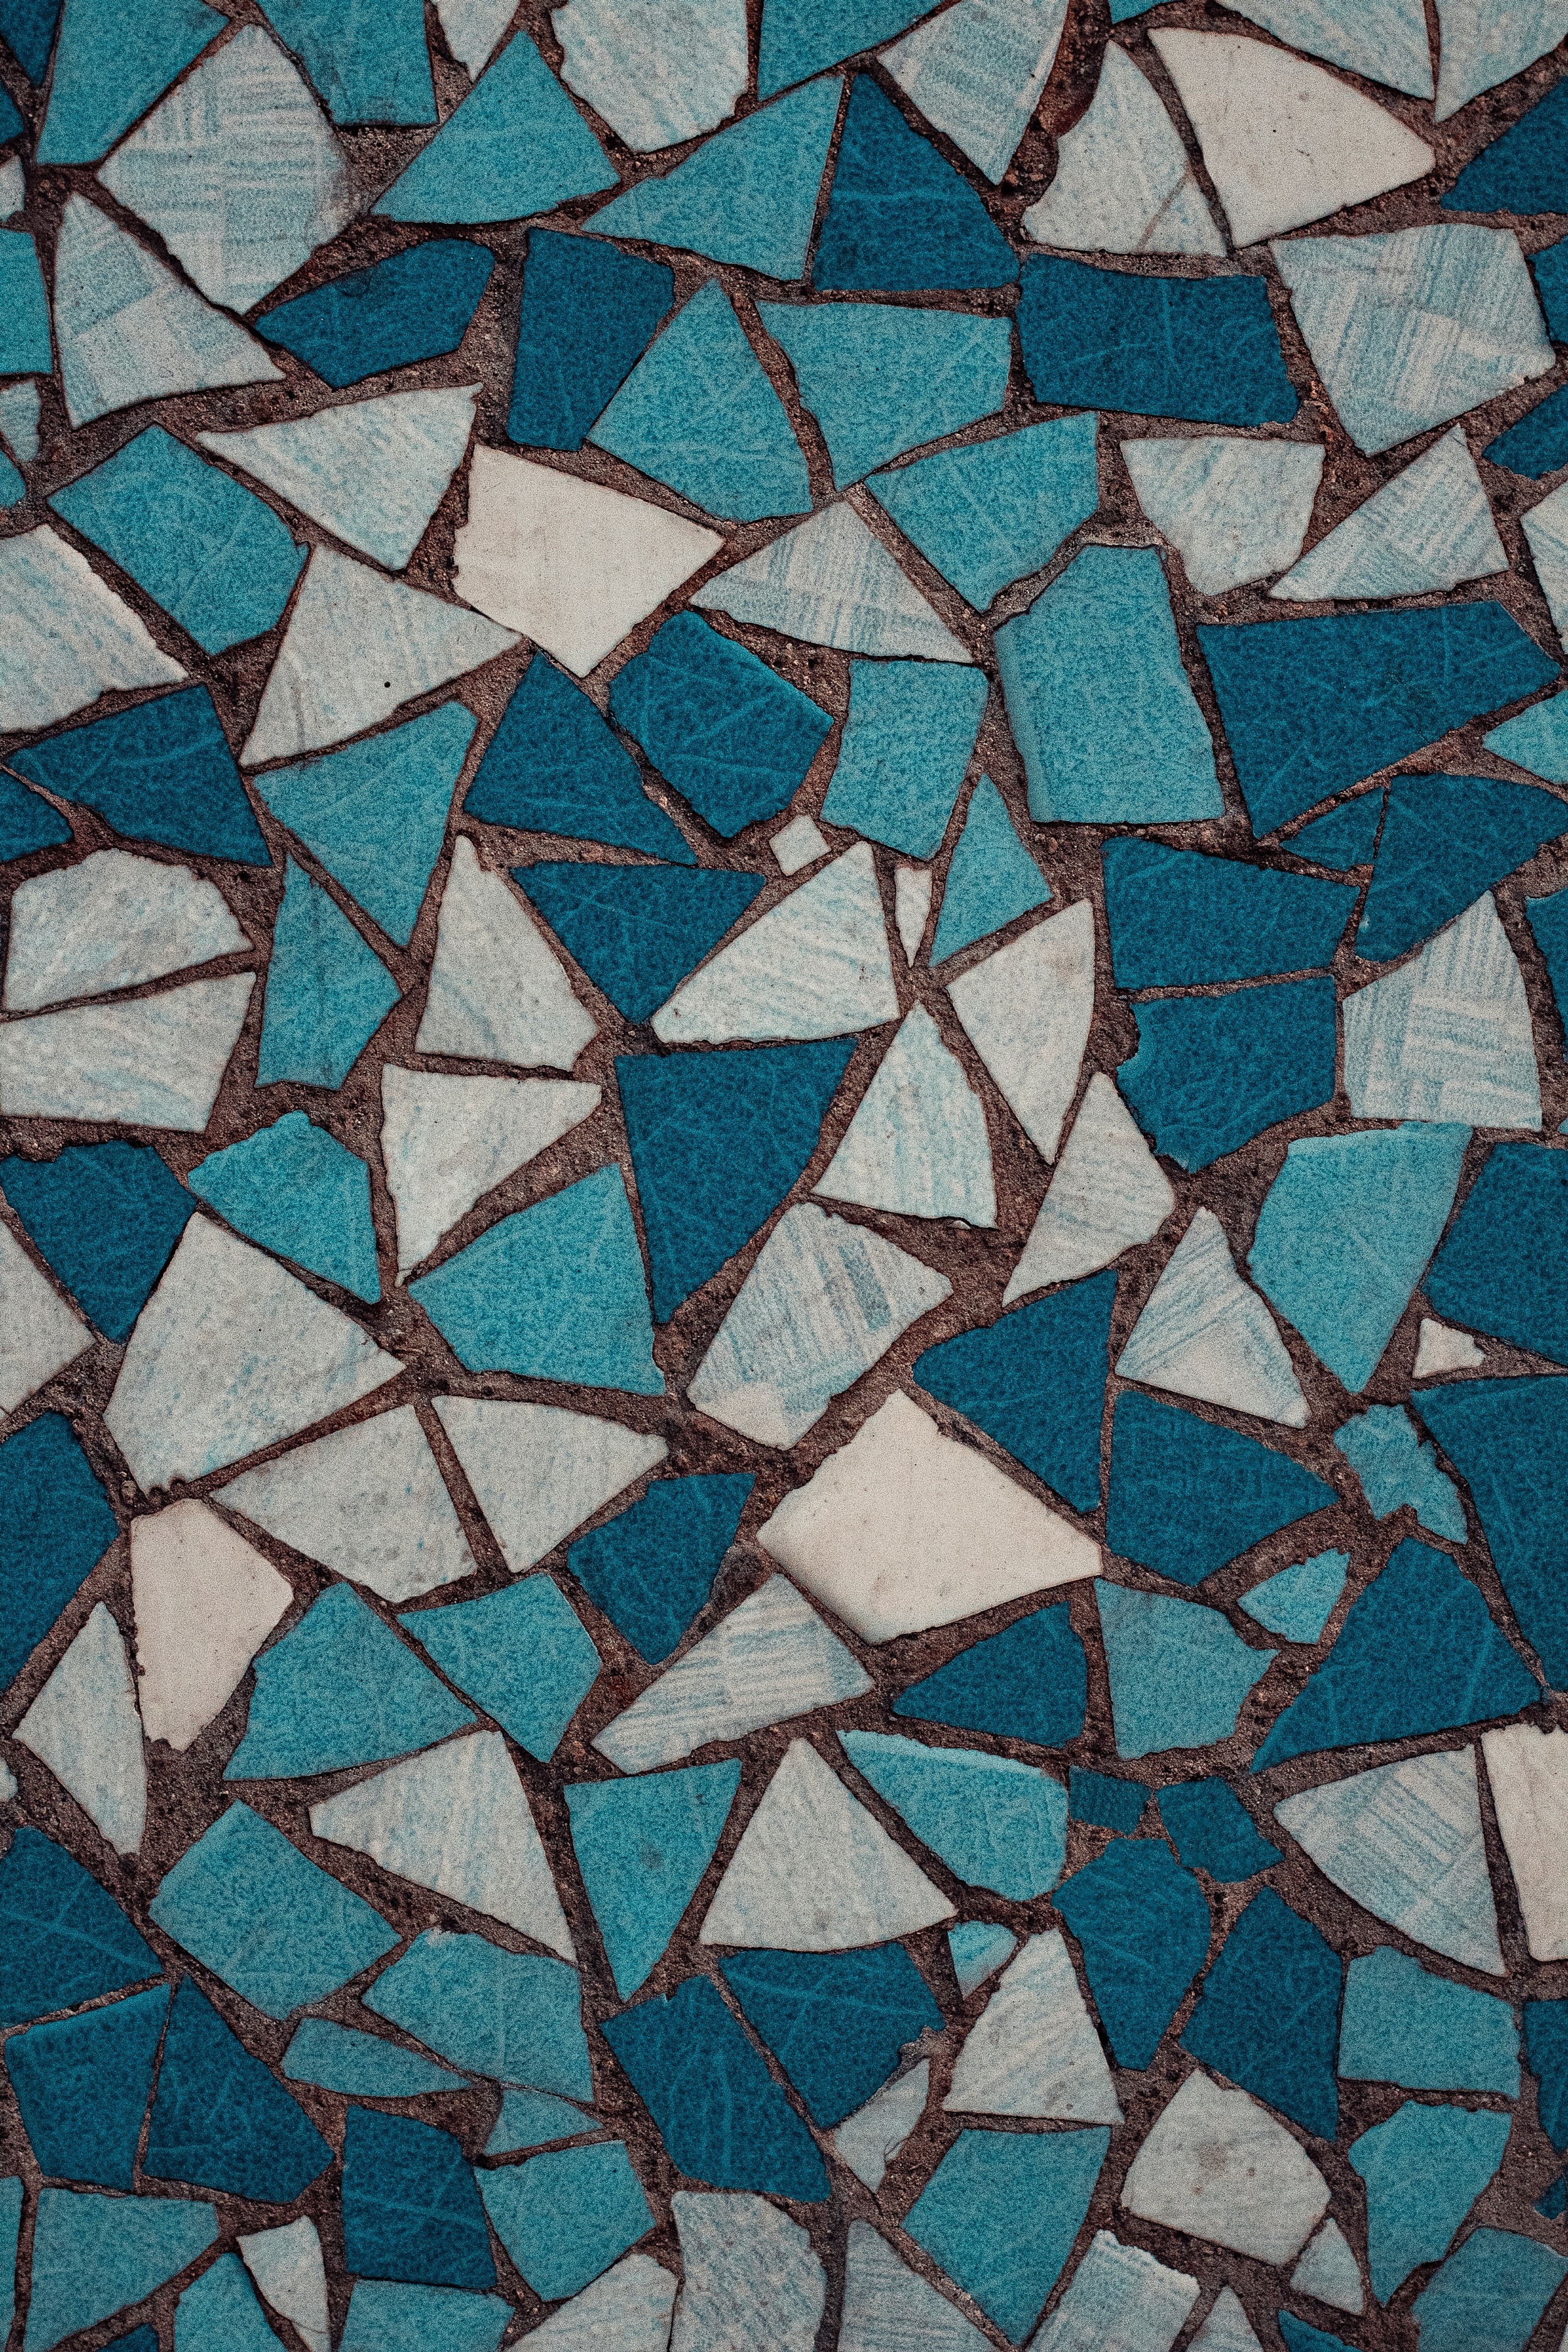 Blue and white mosaic tiles.